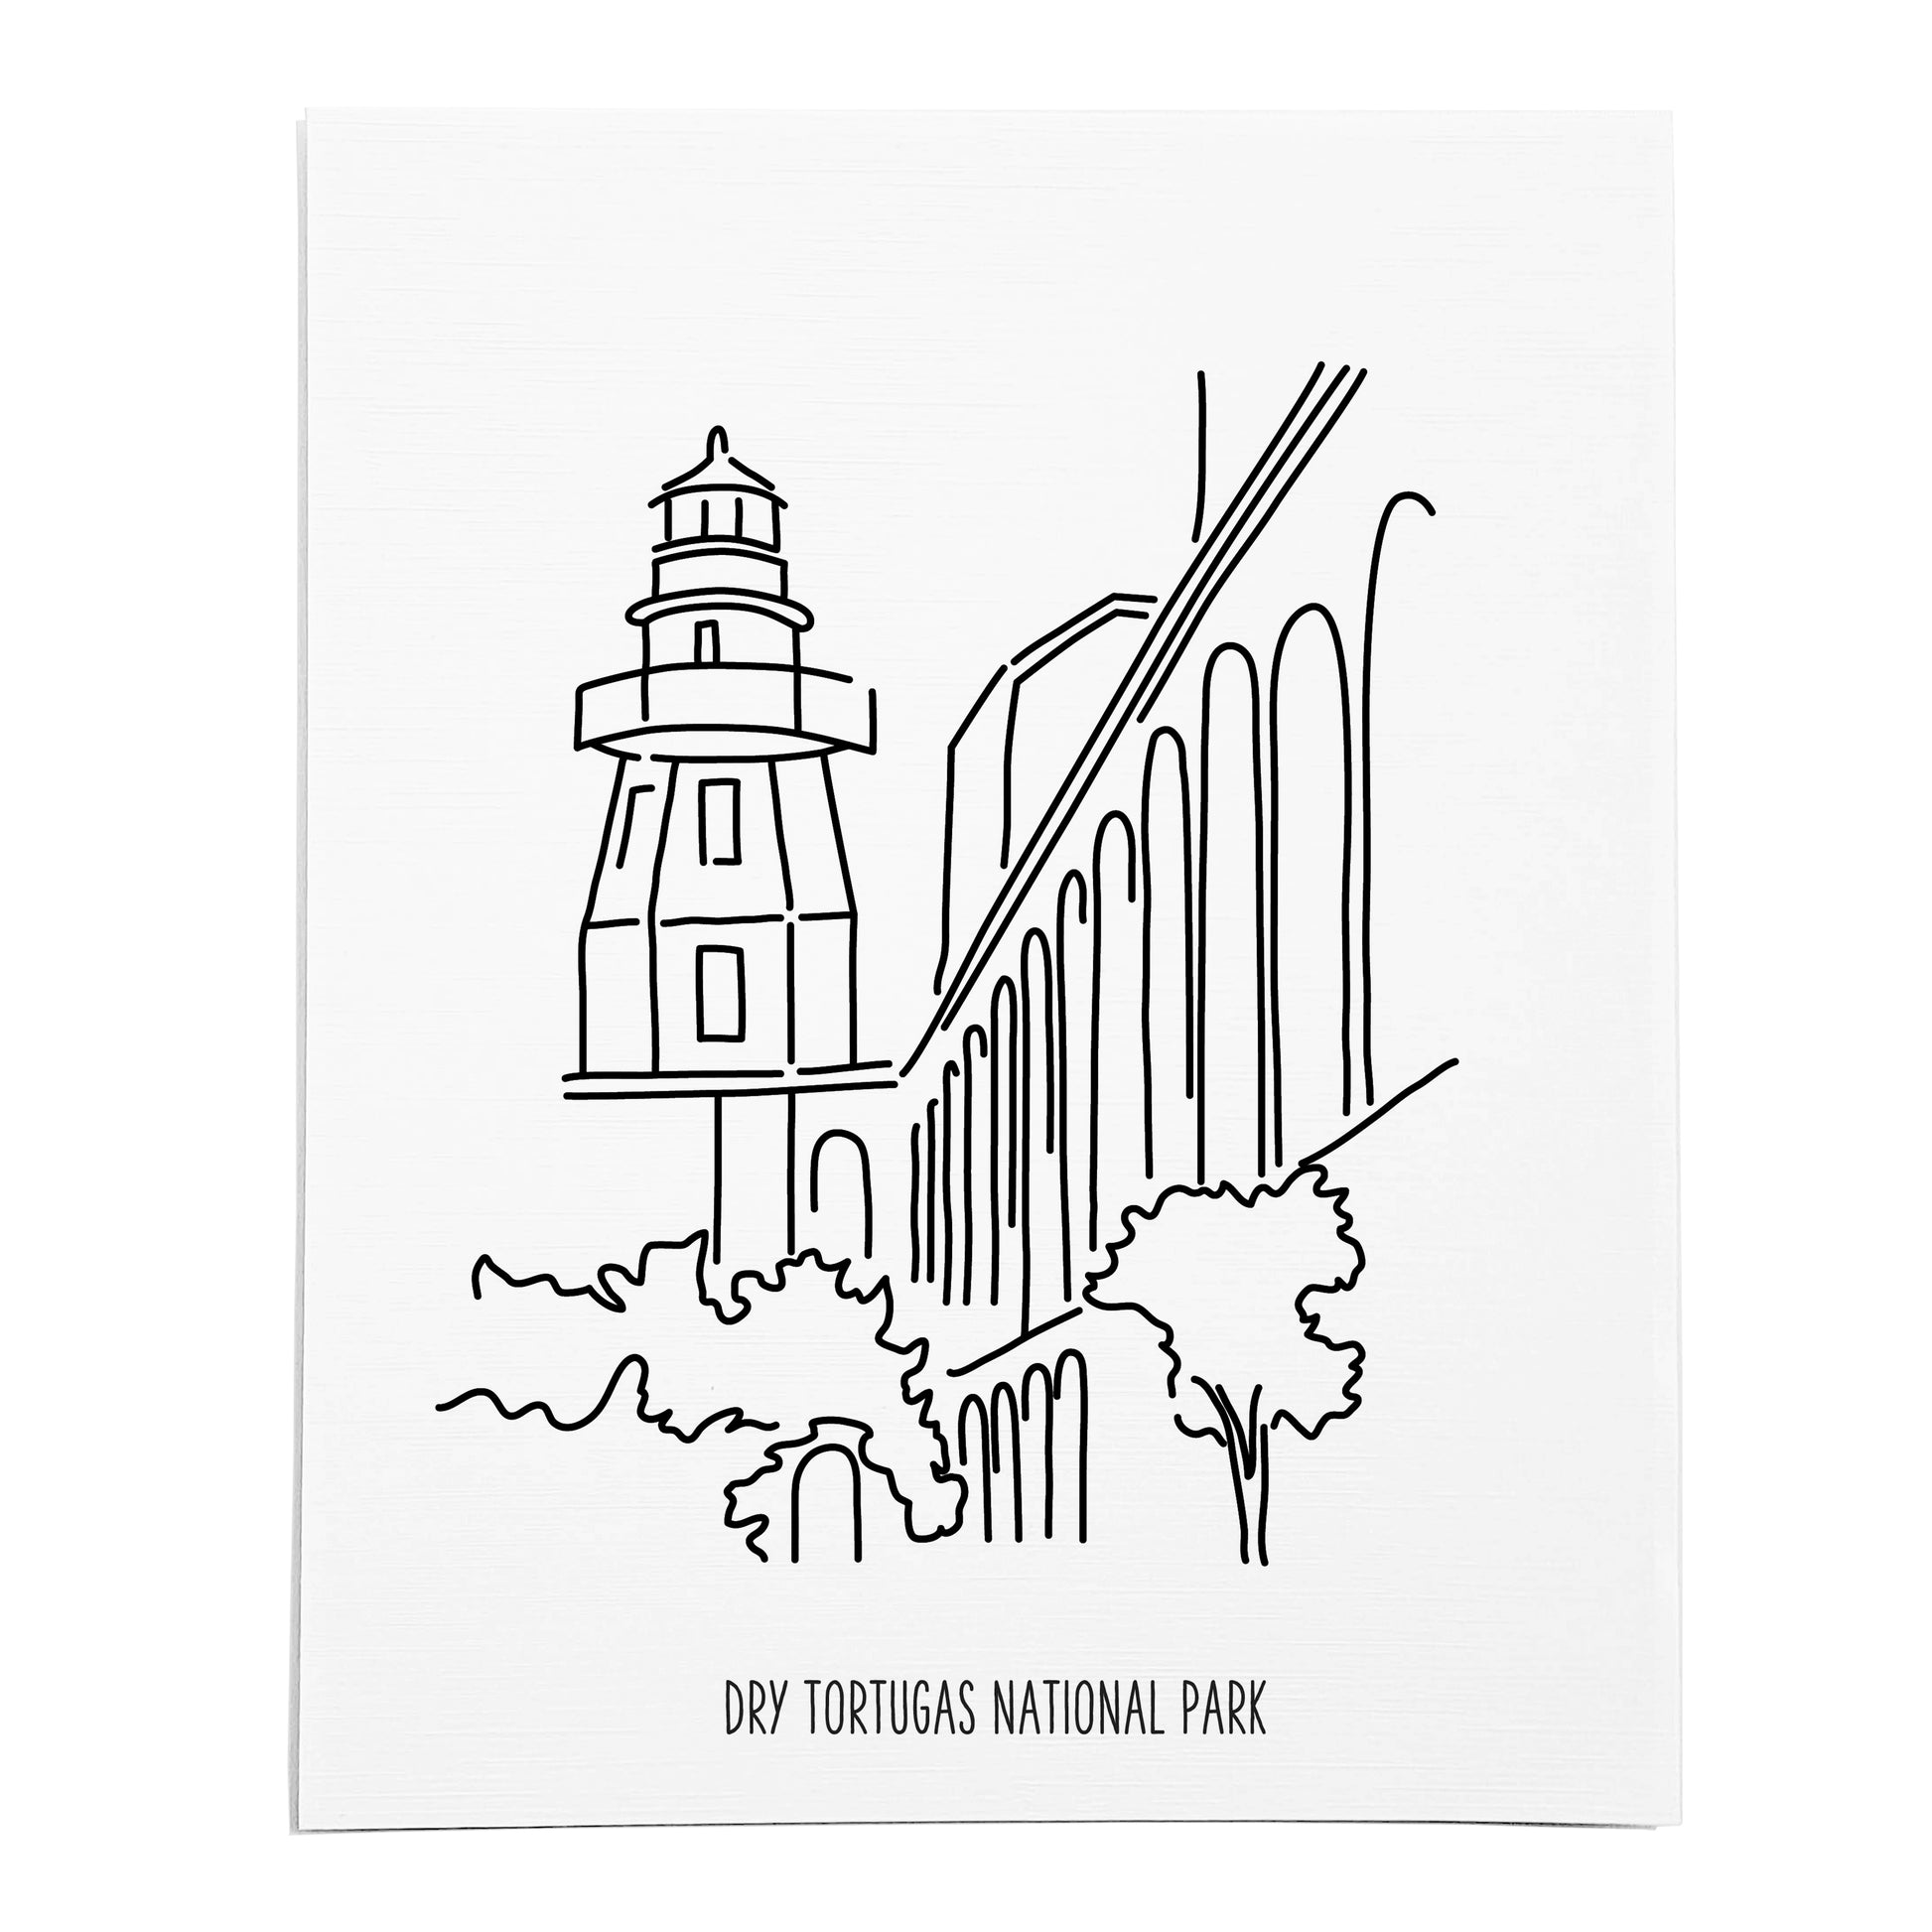 An art print featuring a line drawing of Dry Tortugas National Park on white linen paper